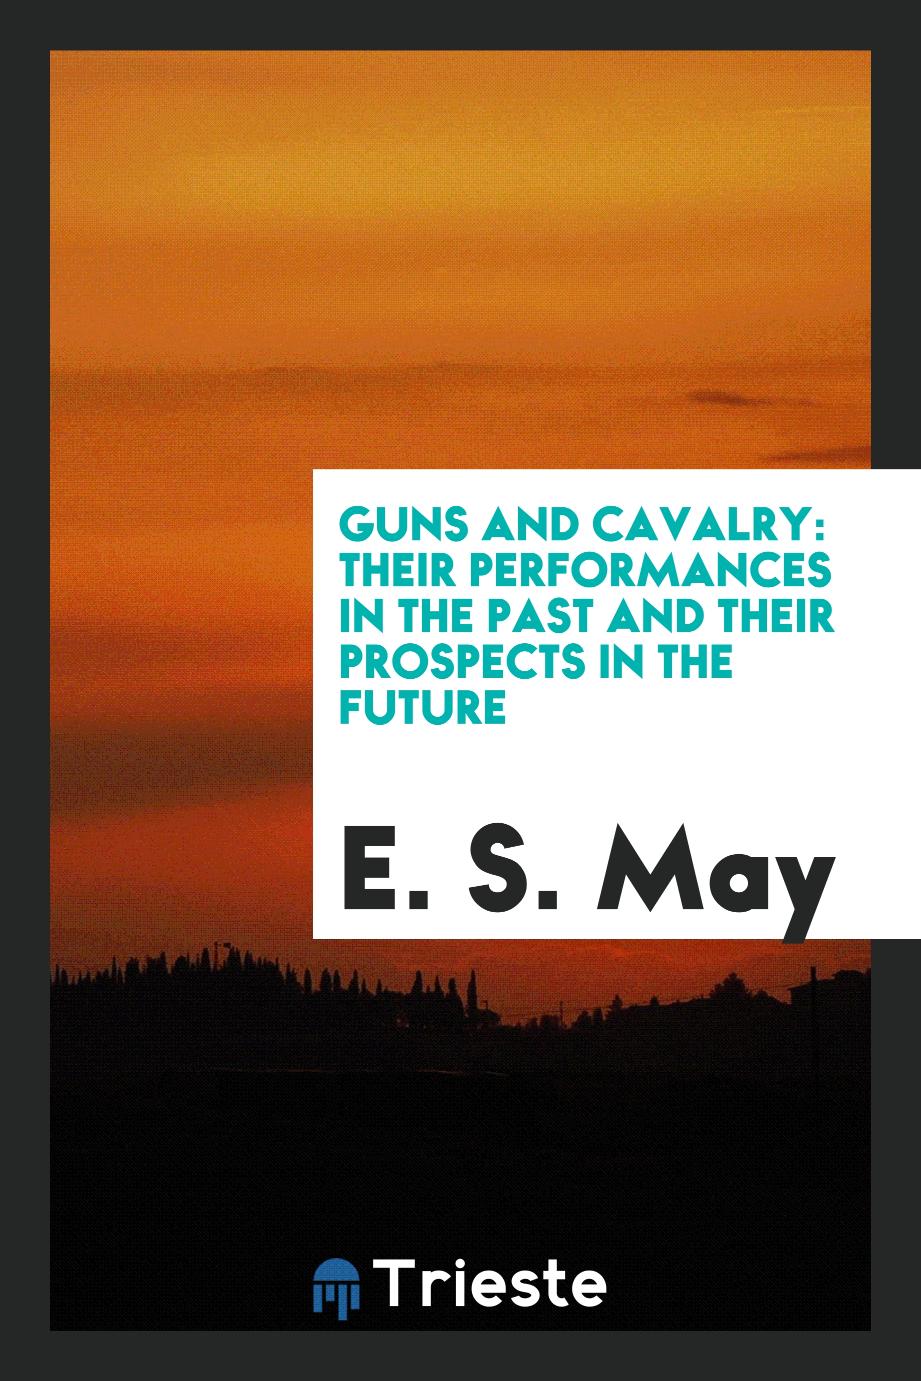 Guns and cavalry: their performances in the past and their prospects in the future